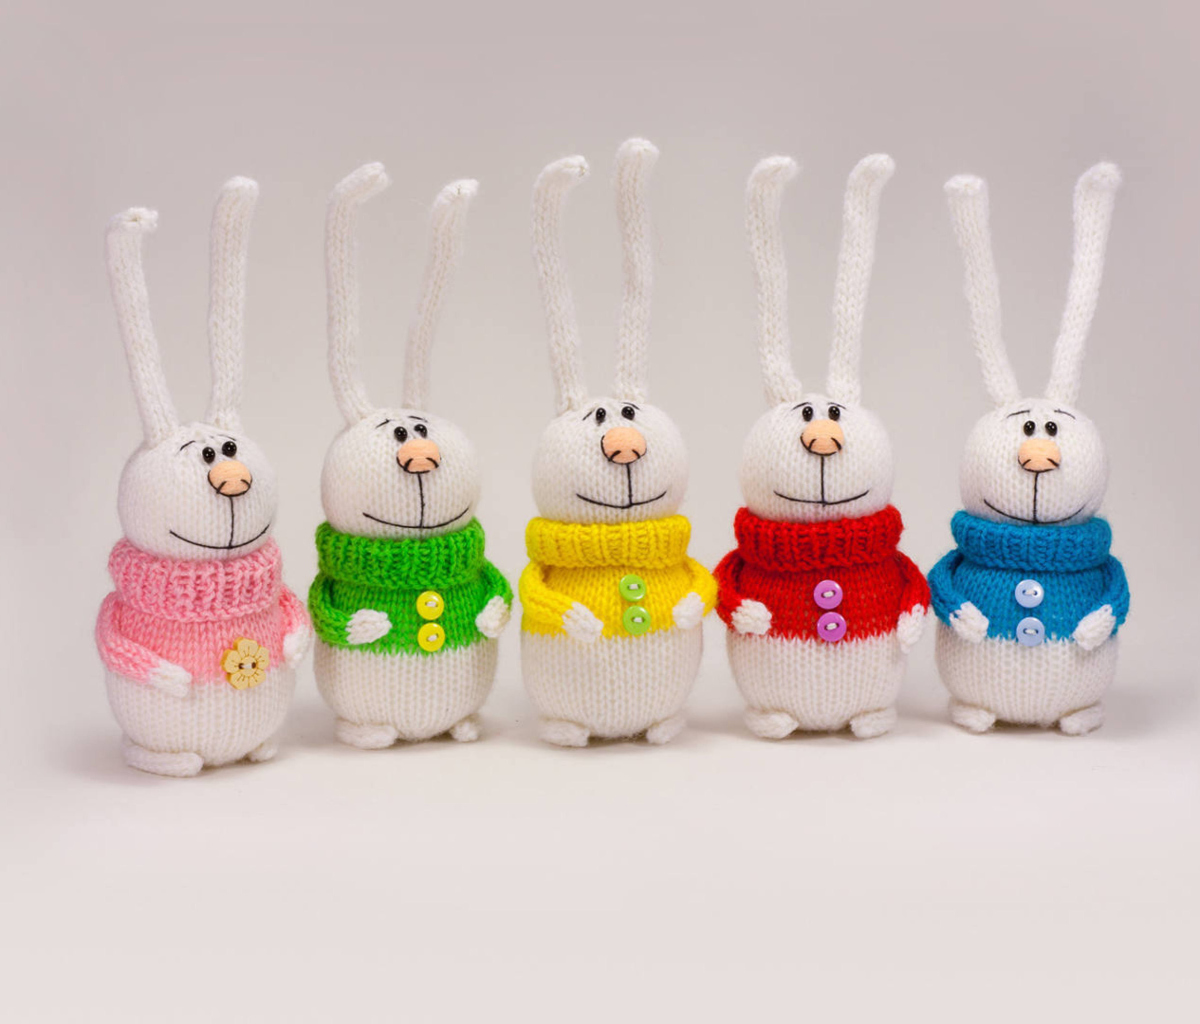 Funny Knitted Bunnies wallpaper 1200x1024